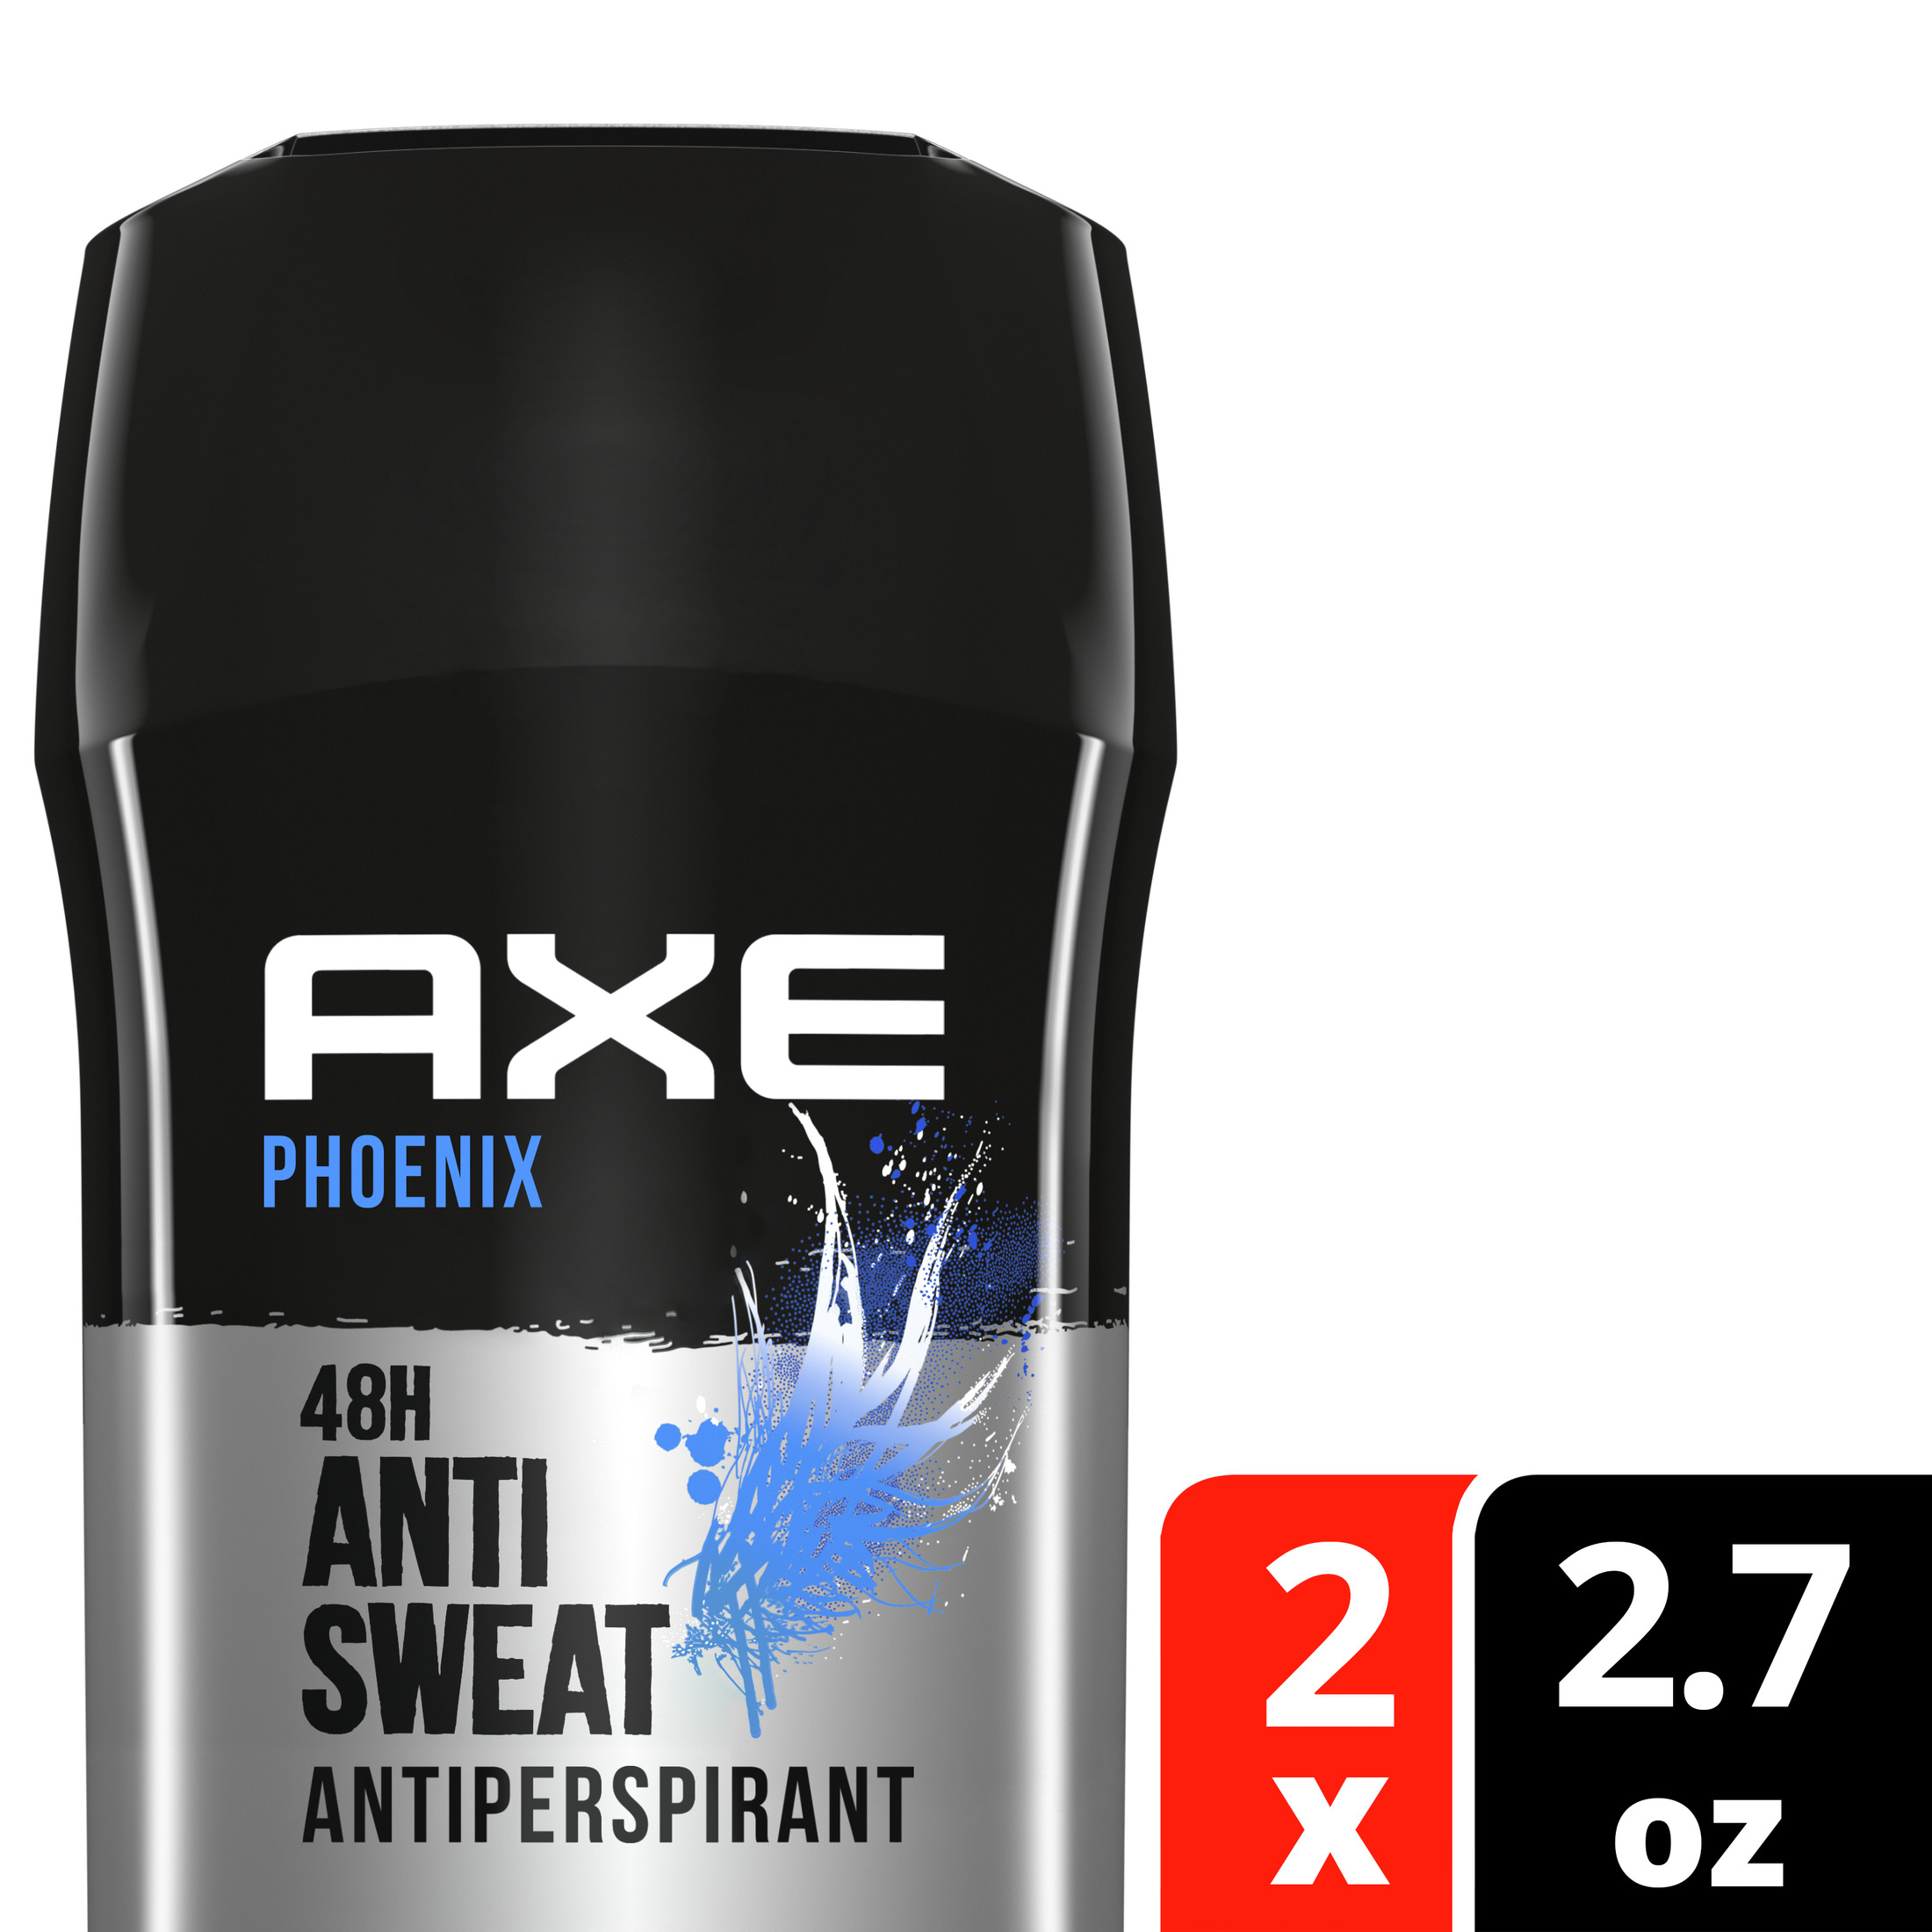 Axe Phoenix Long Lasting Antiperspirant Deodorant Stick Twin Pack, Crushed Mint and Rosemary, 2.7 oz - image 2 of 10